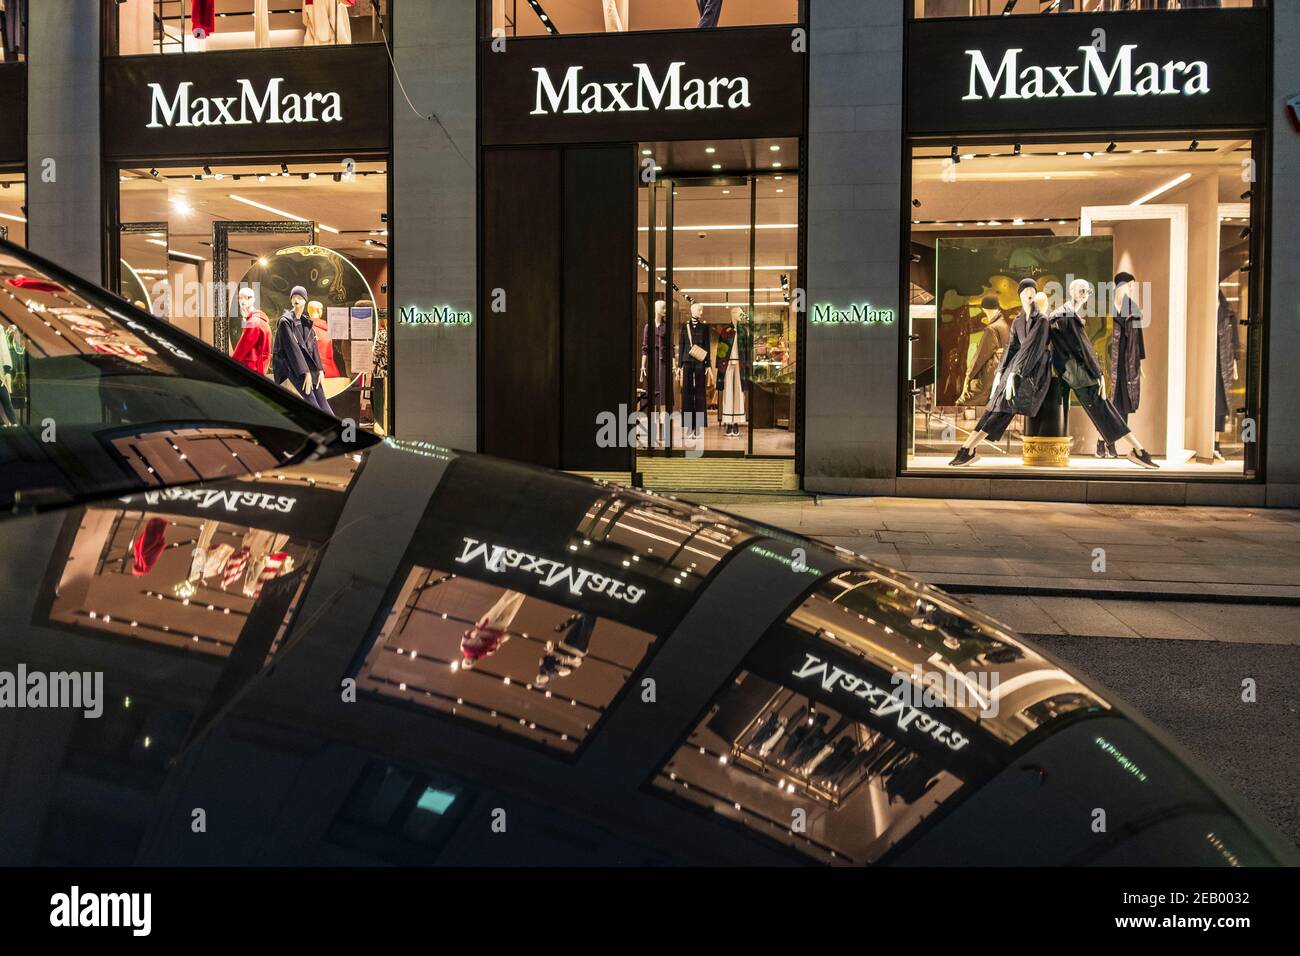 London, UK. 10th Feb, 2021. A reflection of Max Mara in a car in New Bond  Street in London, UK on February 10, 2021 during the third nationwide  lockdown. Max Mara is